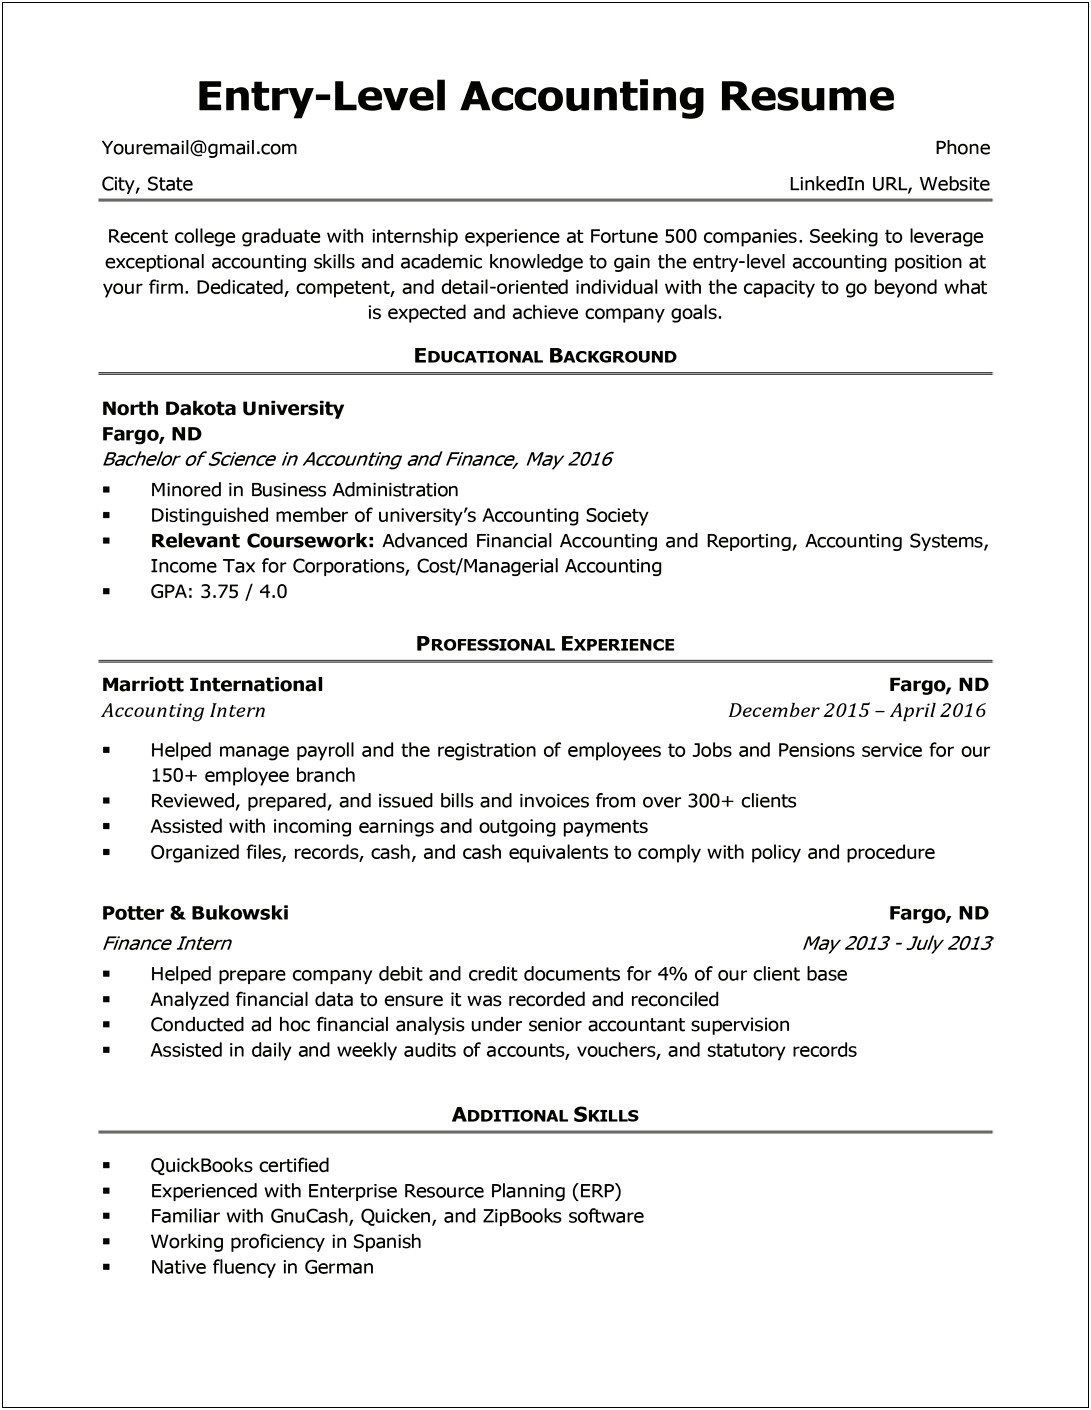 Sample Resume Format For Experienced Finance Professionals